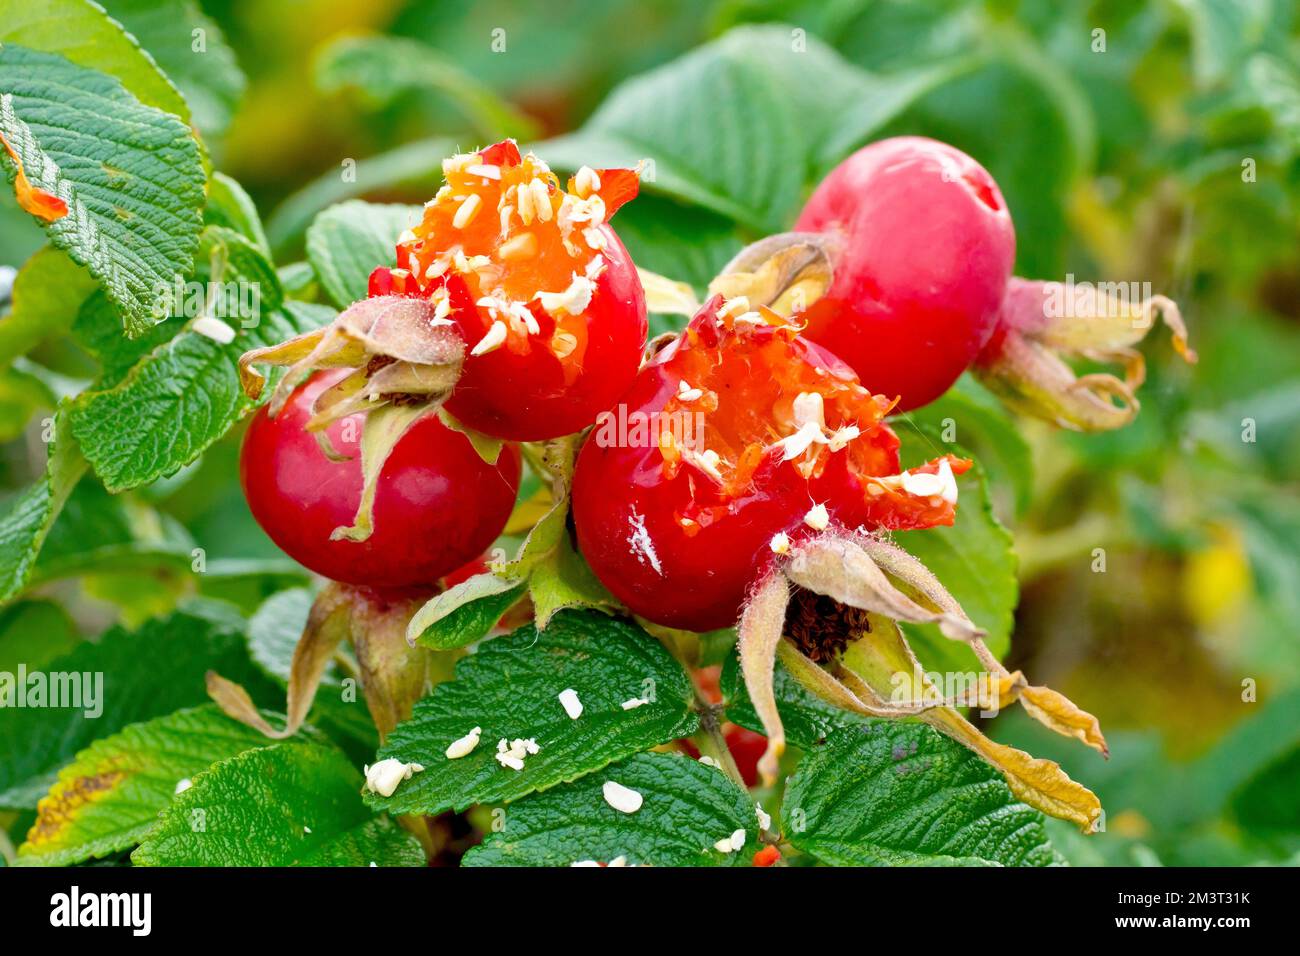 Wild or Japanese Rose (rosa rugosa), close up showing the large red seedpods or hips of the shrub opened up by birds to get at the seeds inside. Stock Photo